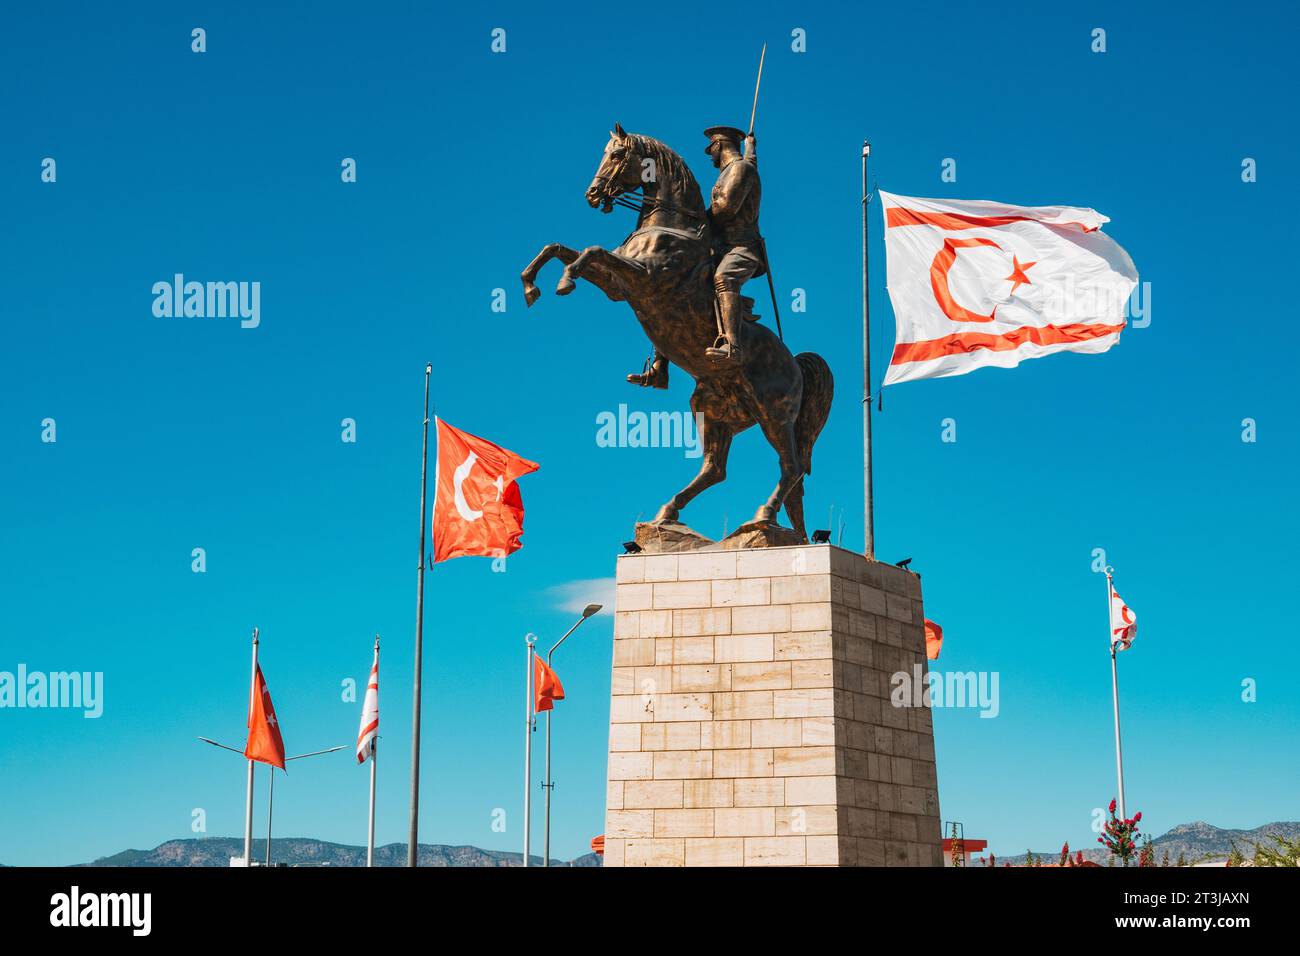 the Türkiye and Northern Cyprus flags fly next to a statue of Atatürk on horseback at a traffic roundabout in North Nicosia Stock Photo